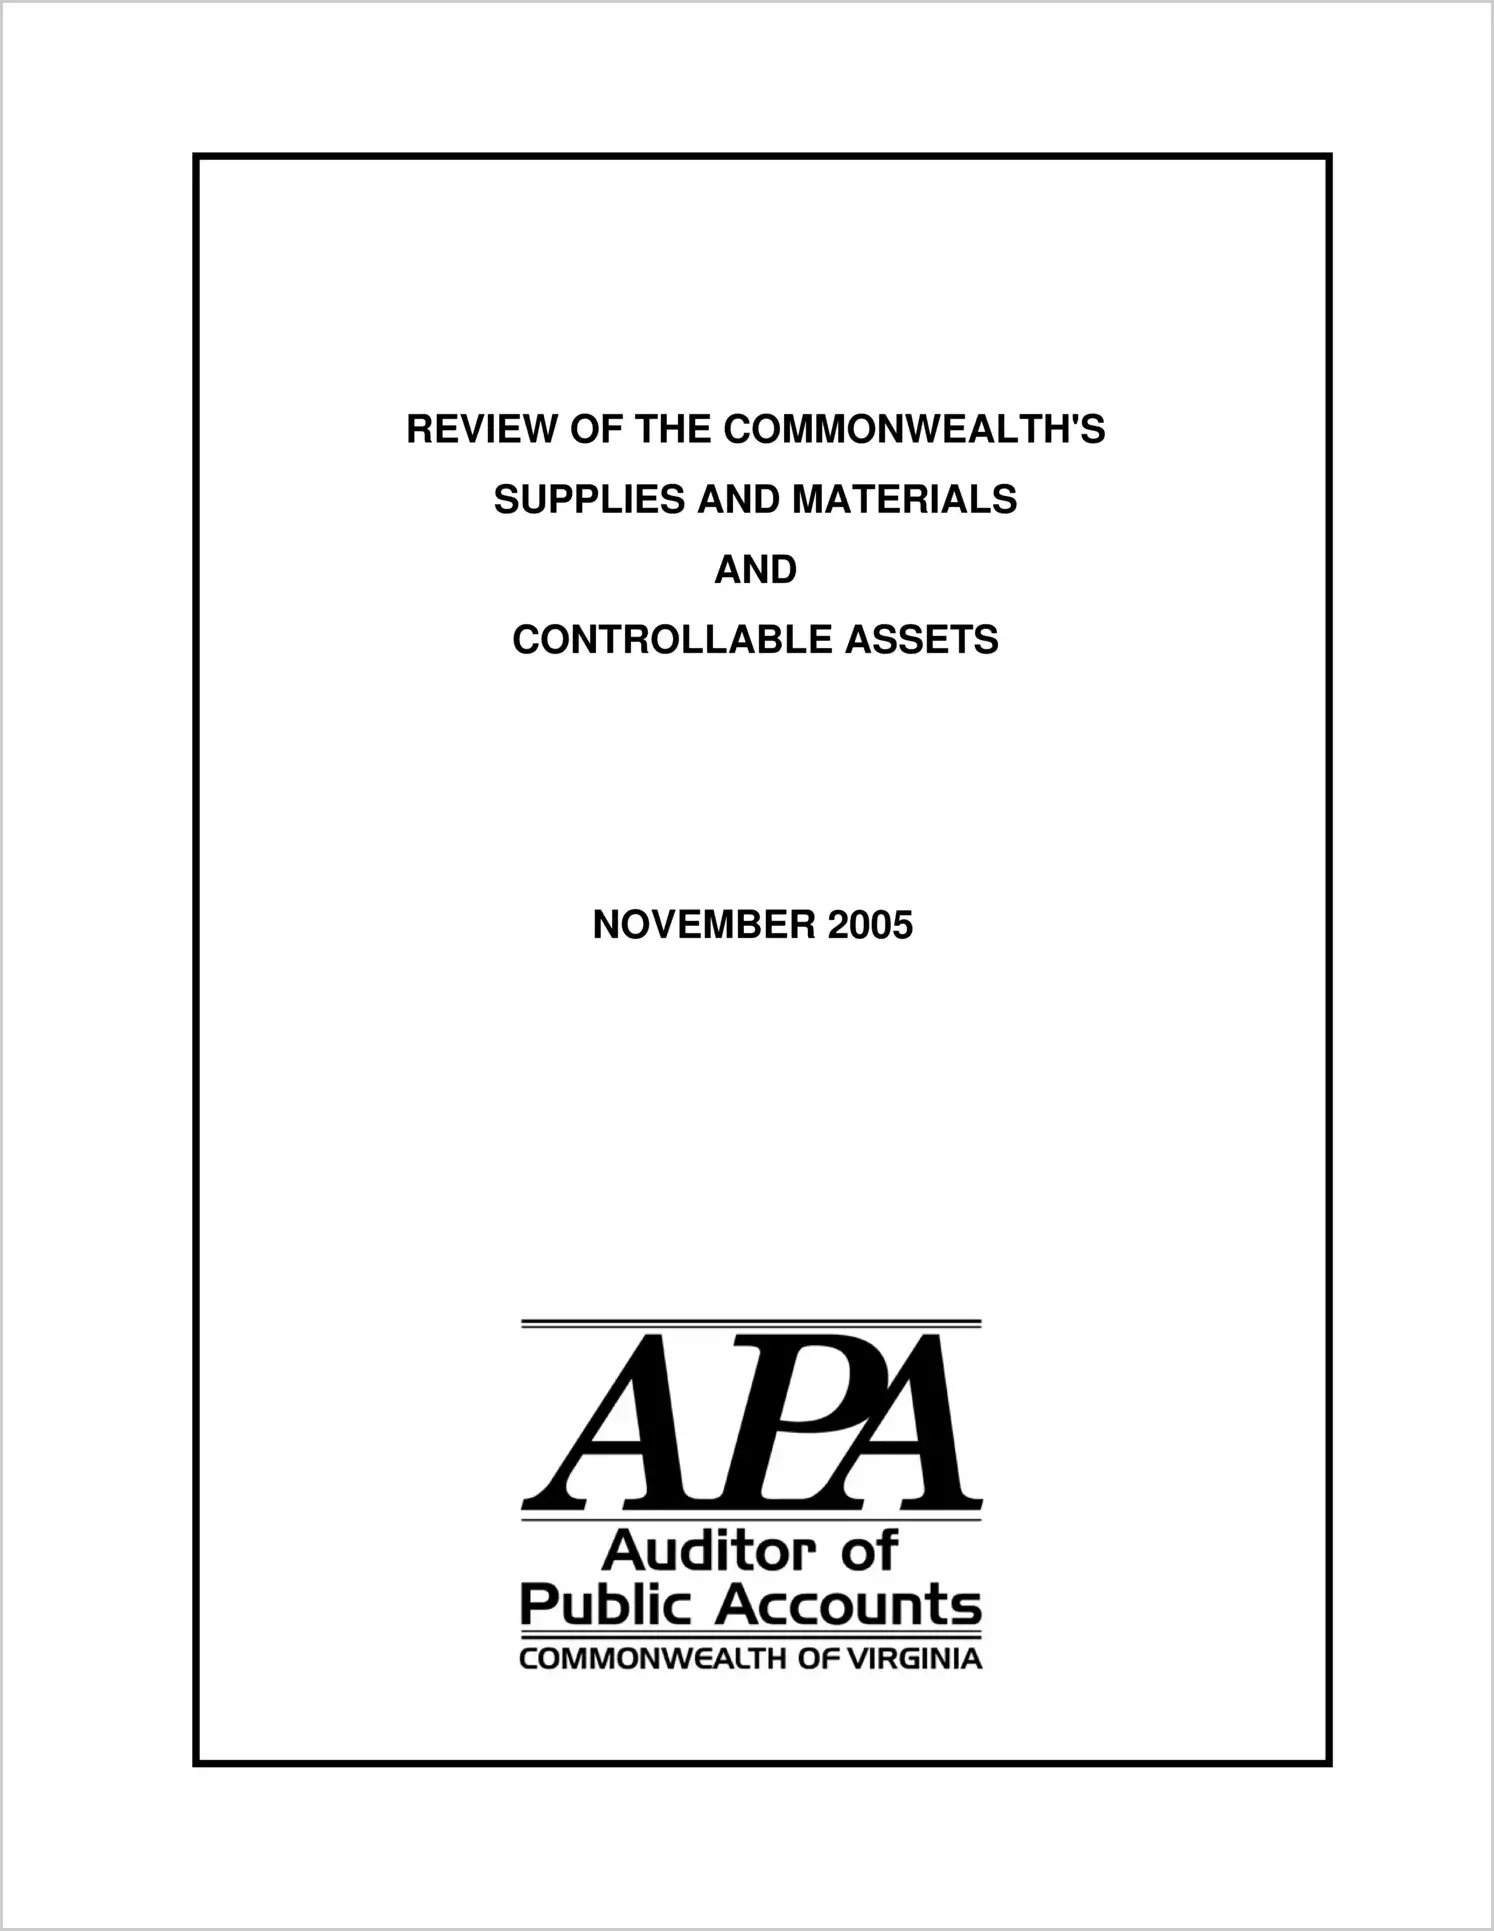 Review of the Commonwealths Supplies and Materials and Controllable Assets (Report Date: 11/2005)